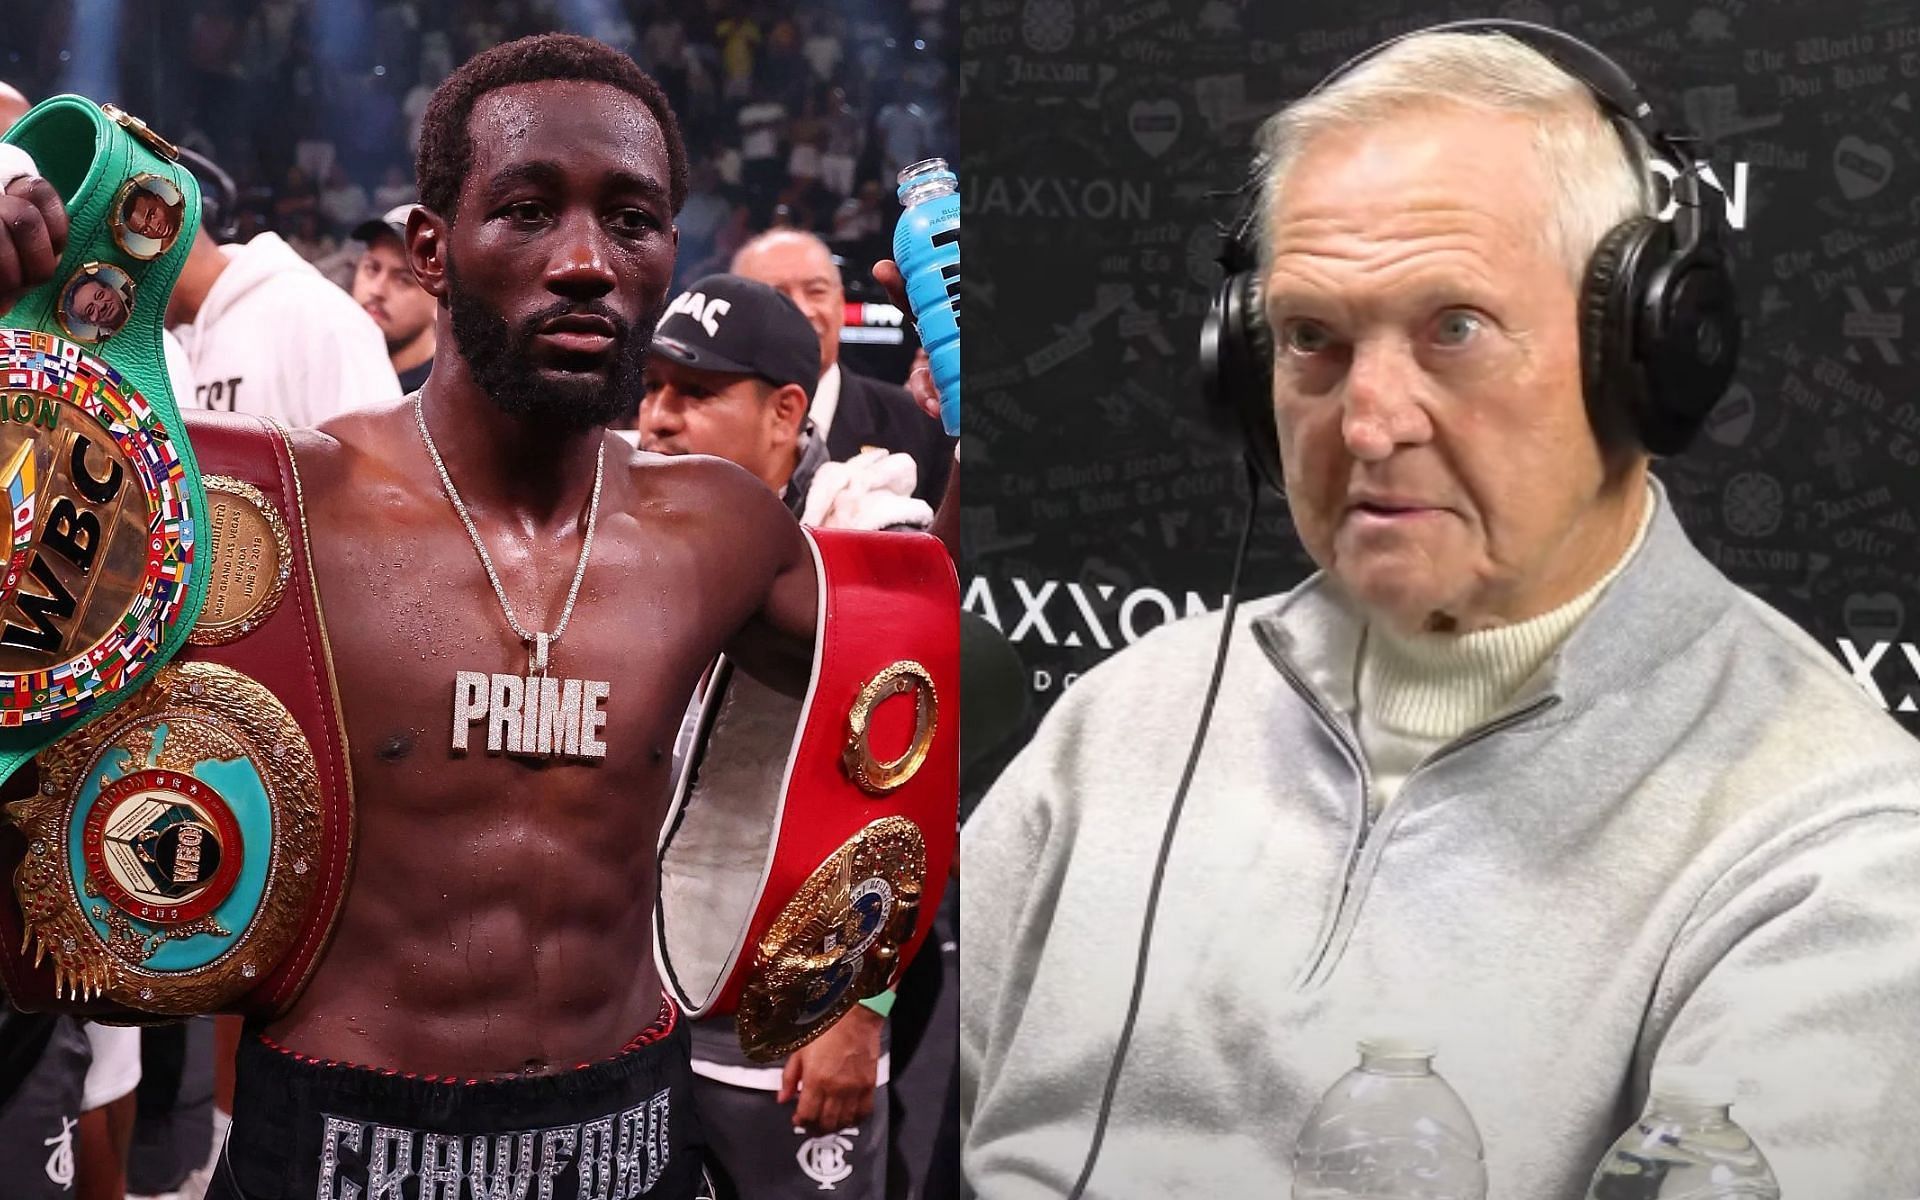 NBA legend Jerry West heaps praise on Terence Crawford [Image courtesy: Getty Images, and JAXXON PODCAST - YouTube]